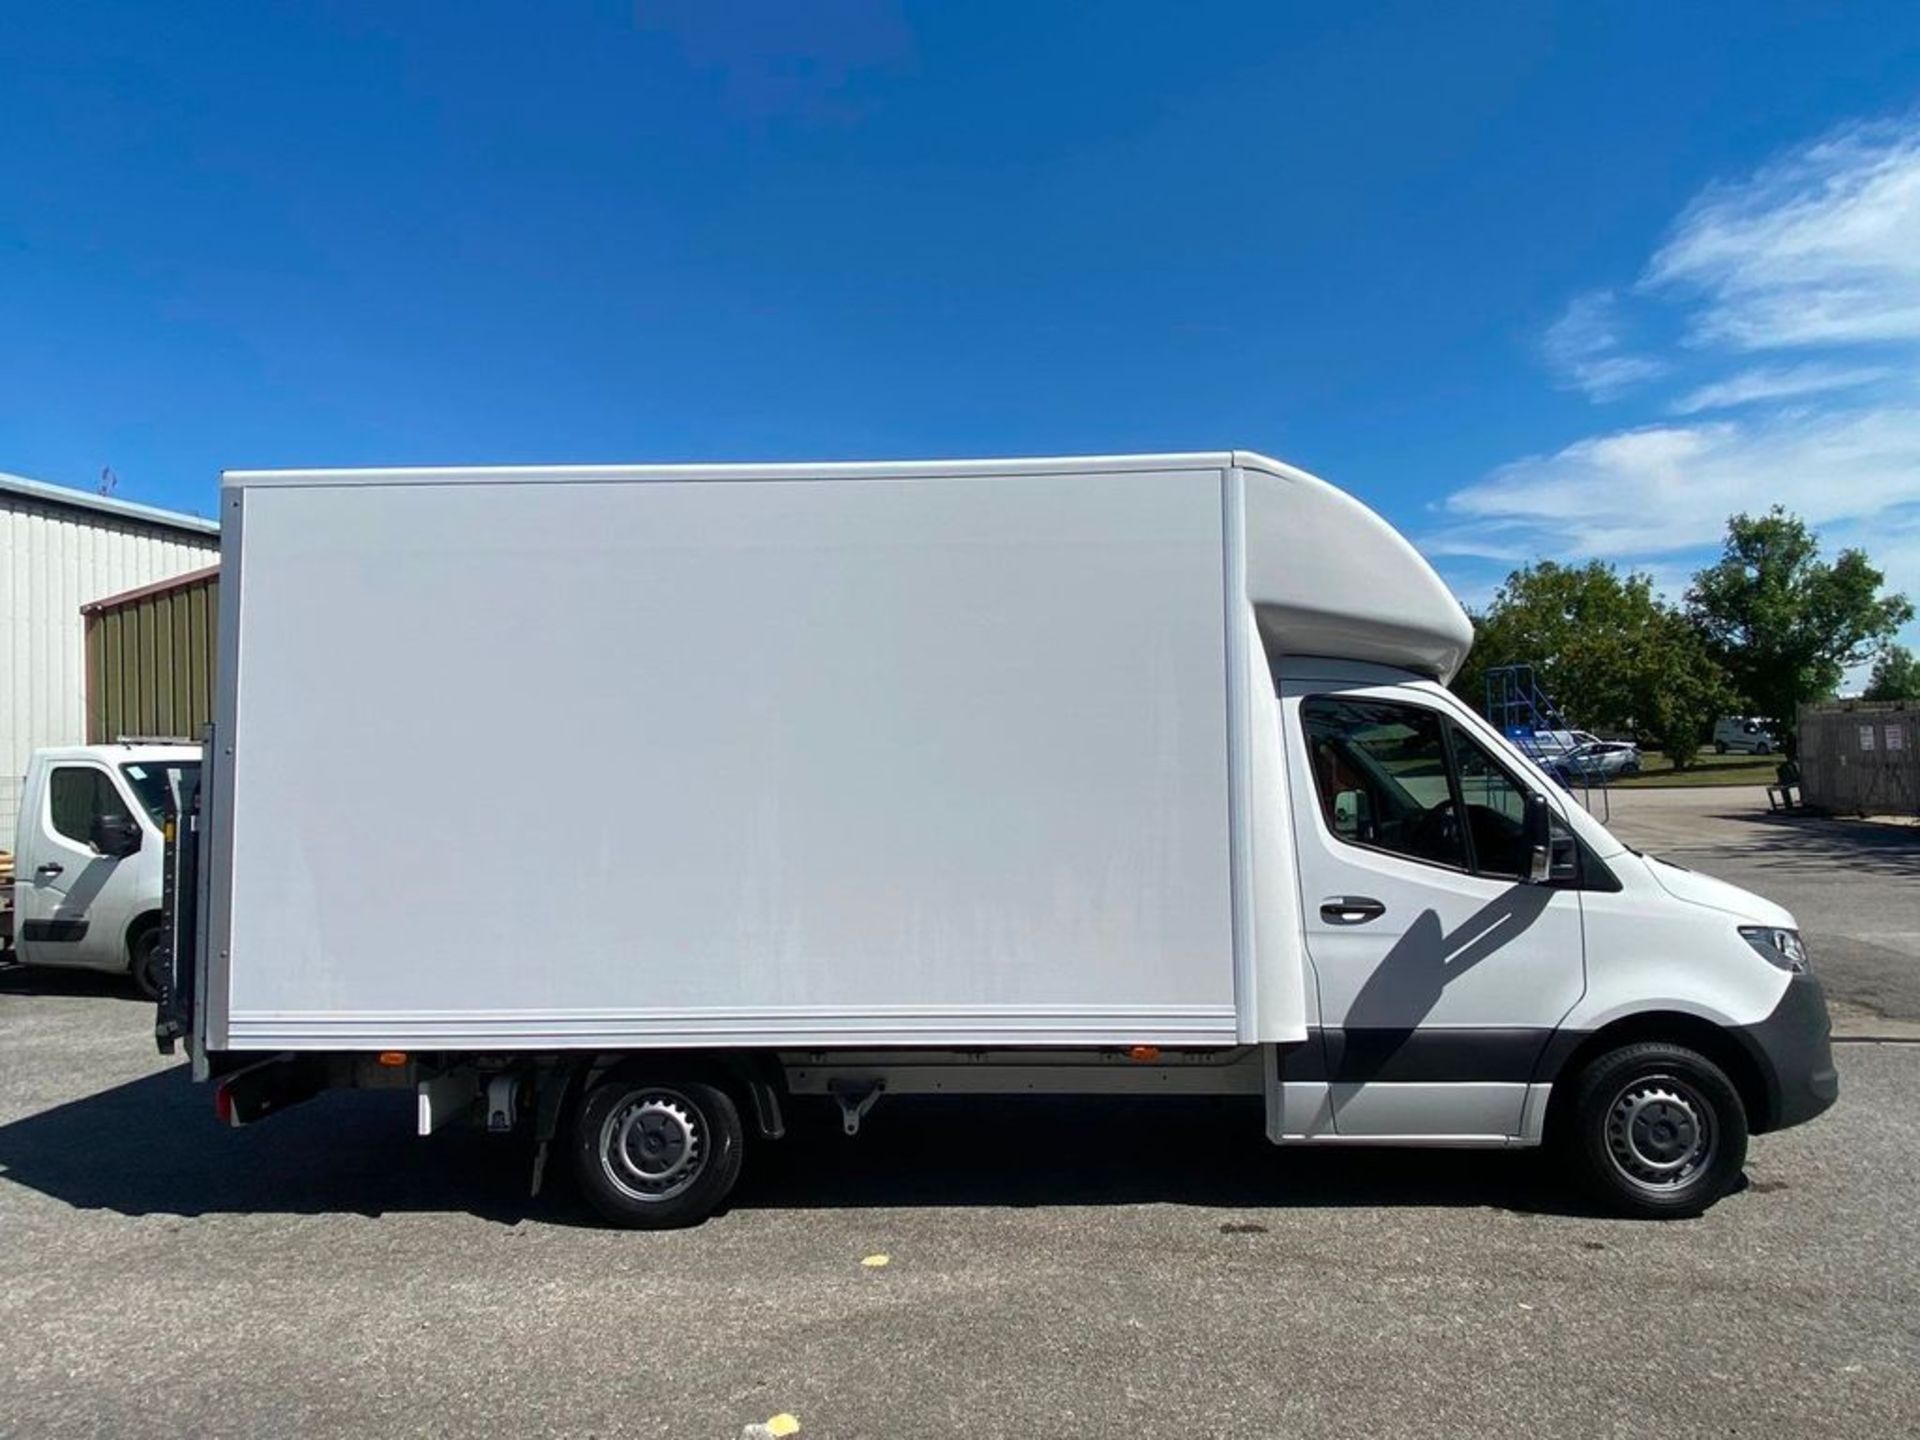 (RESERVE MET)Mercedes Sprinter 314Cdi LWB Luton Body with TL - 2020 20 Reg 1 Owner - New Shape - Image 2 of 8